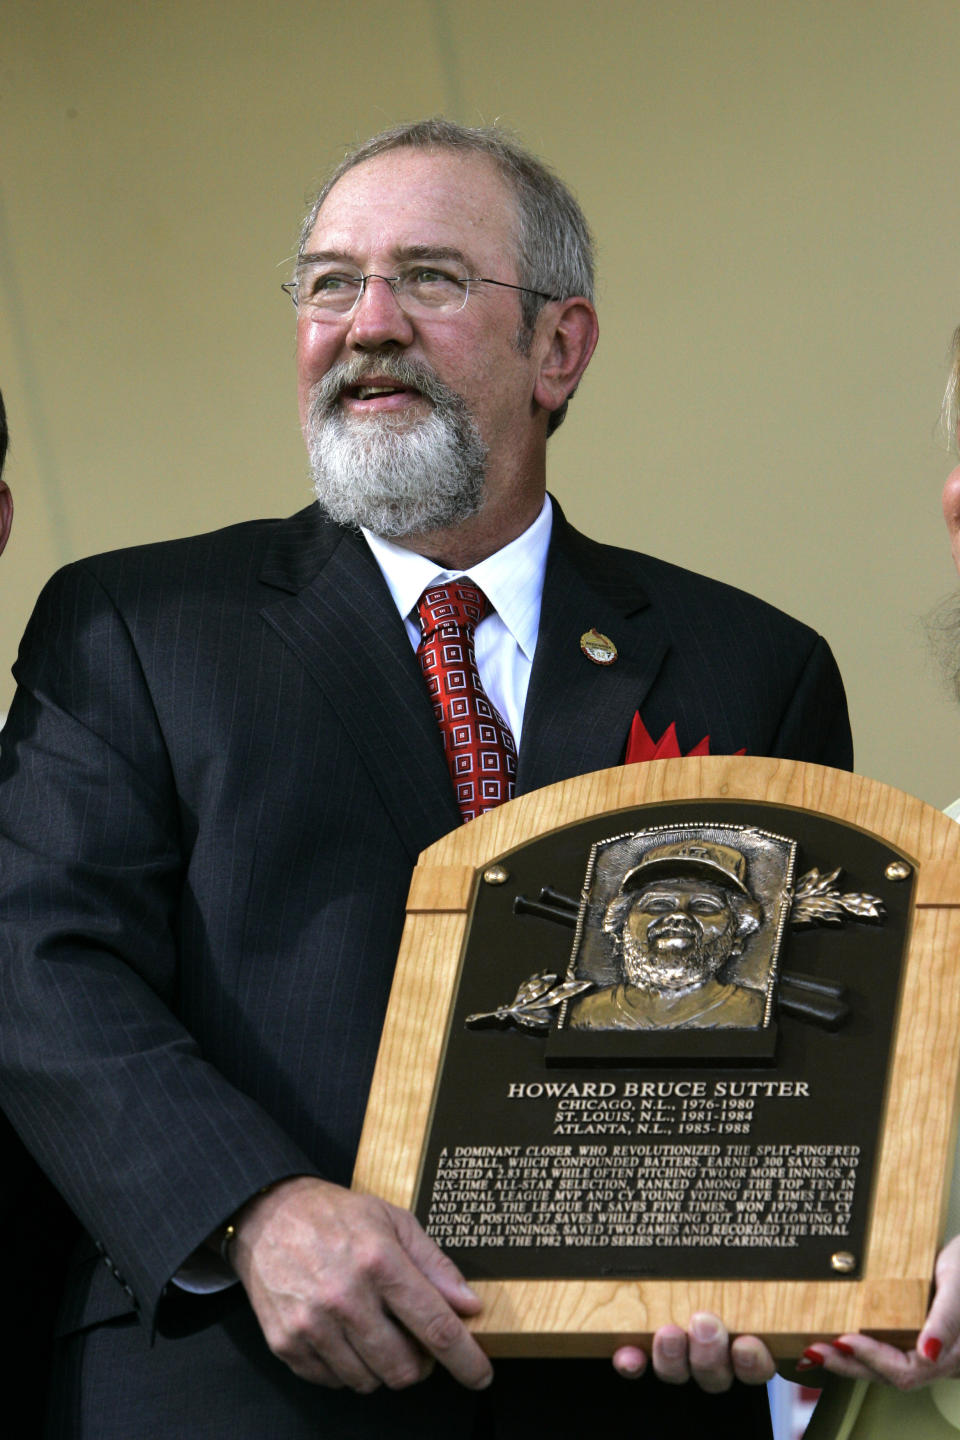 FILE - Bruce Sutter poses with his Baseball Hall of Fame plaque at induction ceremonies in Cooperstown, N.Y., July 30, 2006. Hall of Fame reliever and 1979 Cy Young winner Bruce Sutter has died. He was 69. Major League Baseball and the St. Louis Cardinals announced Sutter’s death on Friday, Oct. 14, 2022. The Baseball Hall of Fame says Sutter died Thursday in Cartersville, Georgia. (AP Photo/Jim McKnight, File)